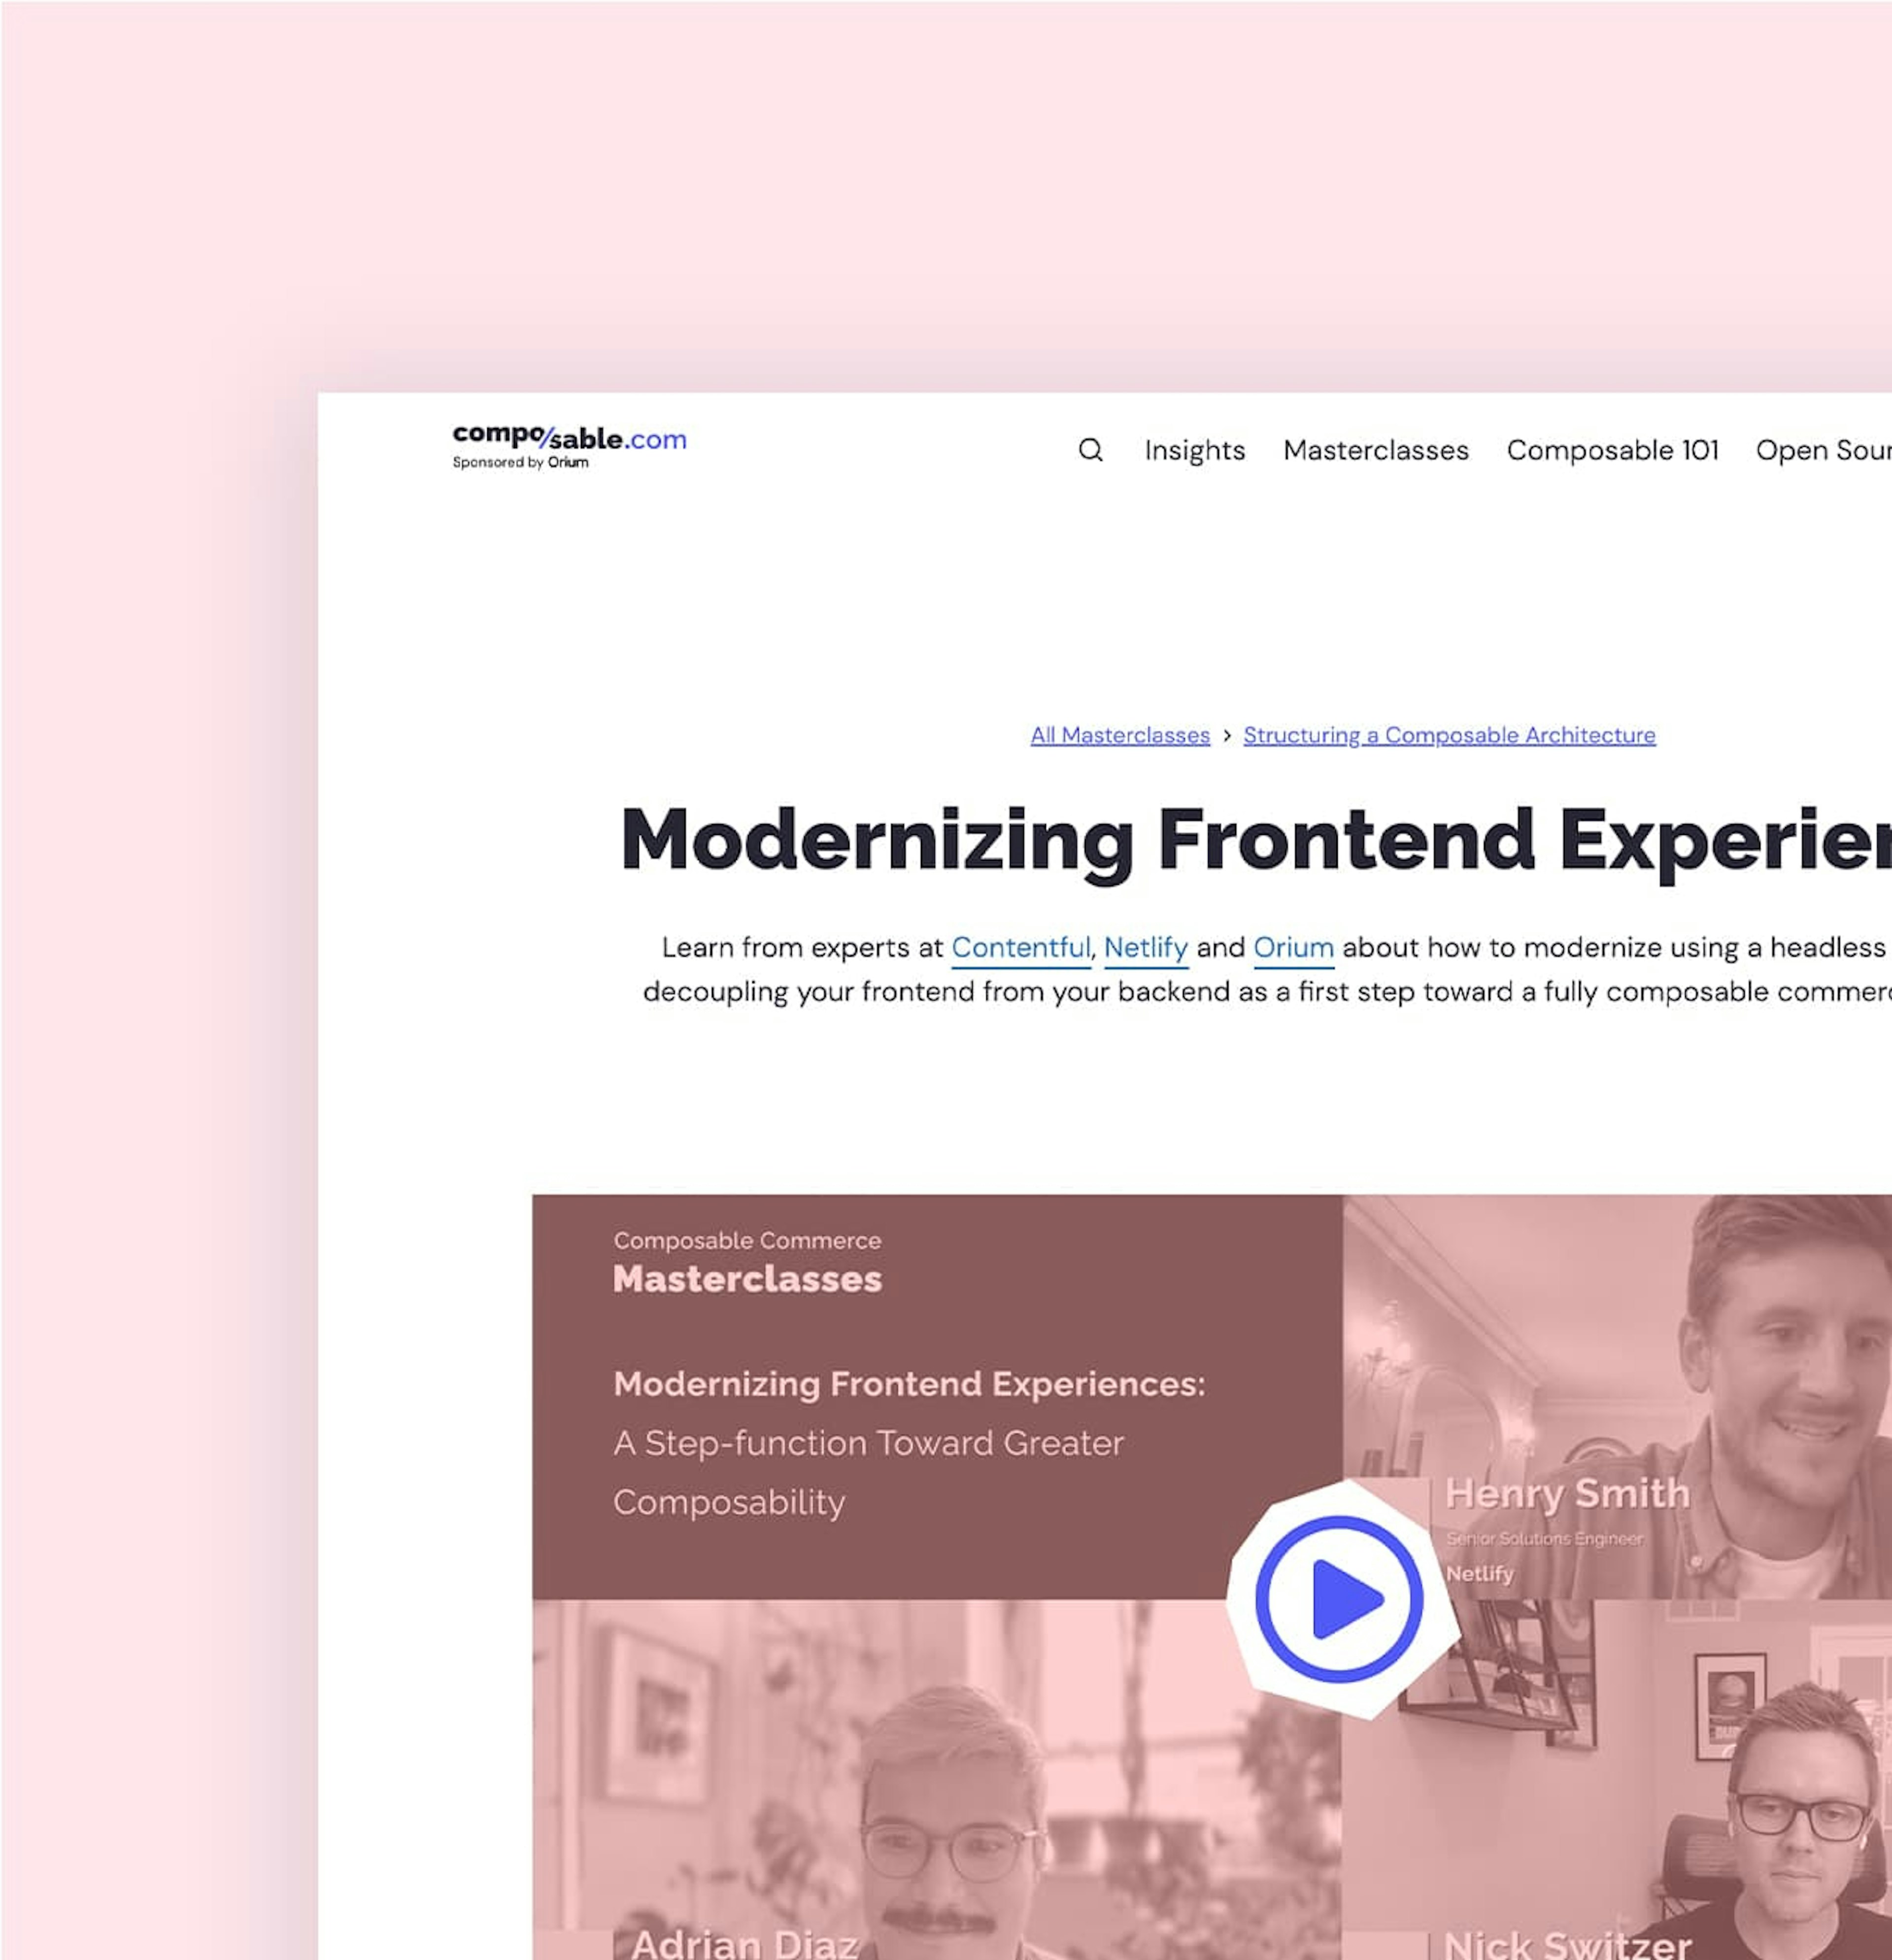 A screenshot of the Modernizing Frontend Experiences masterclass on the Composable.com website.